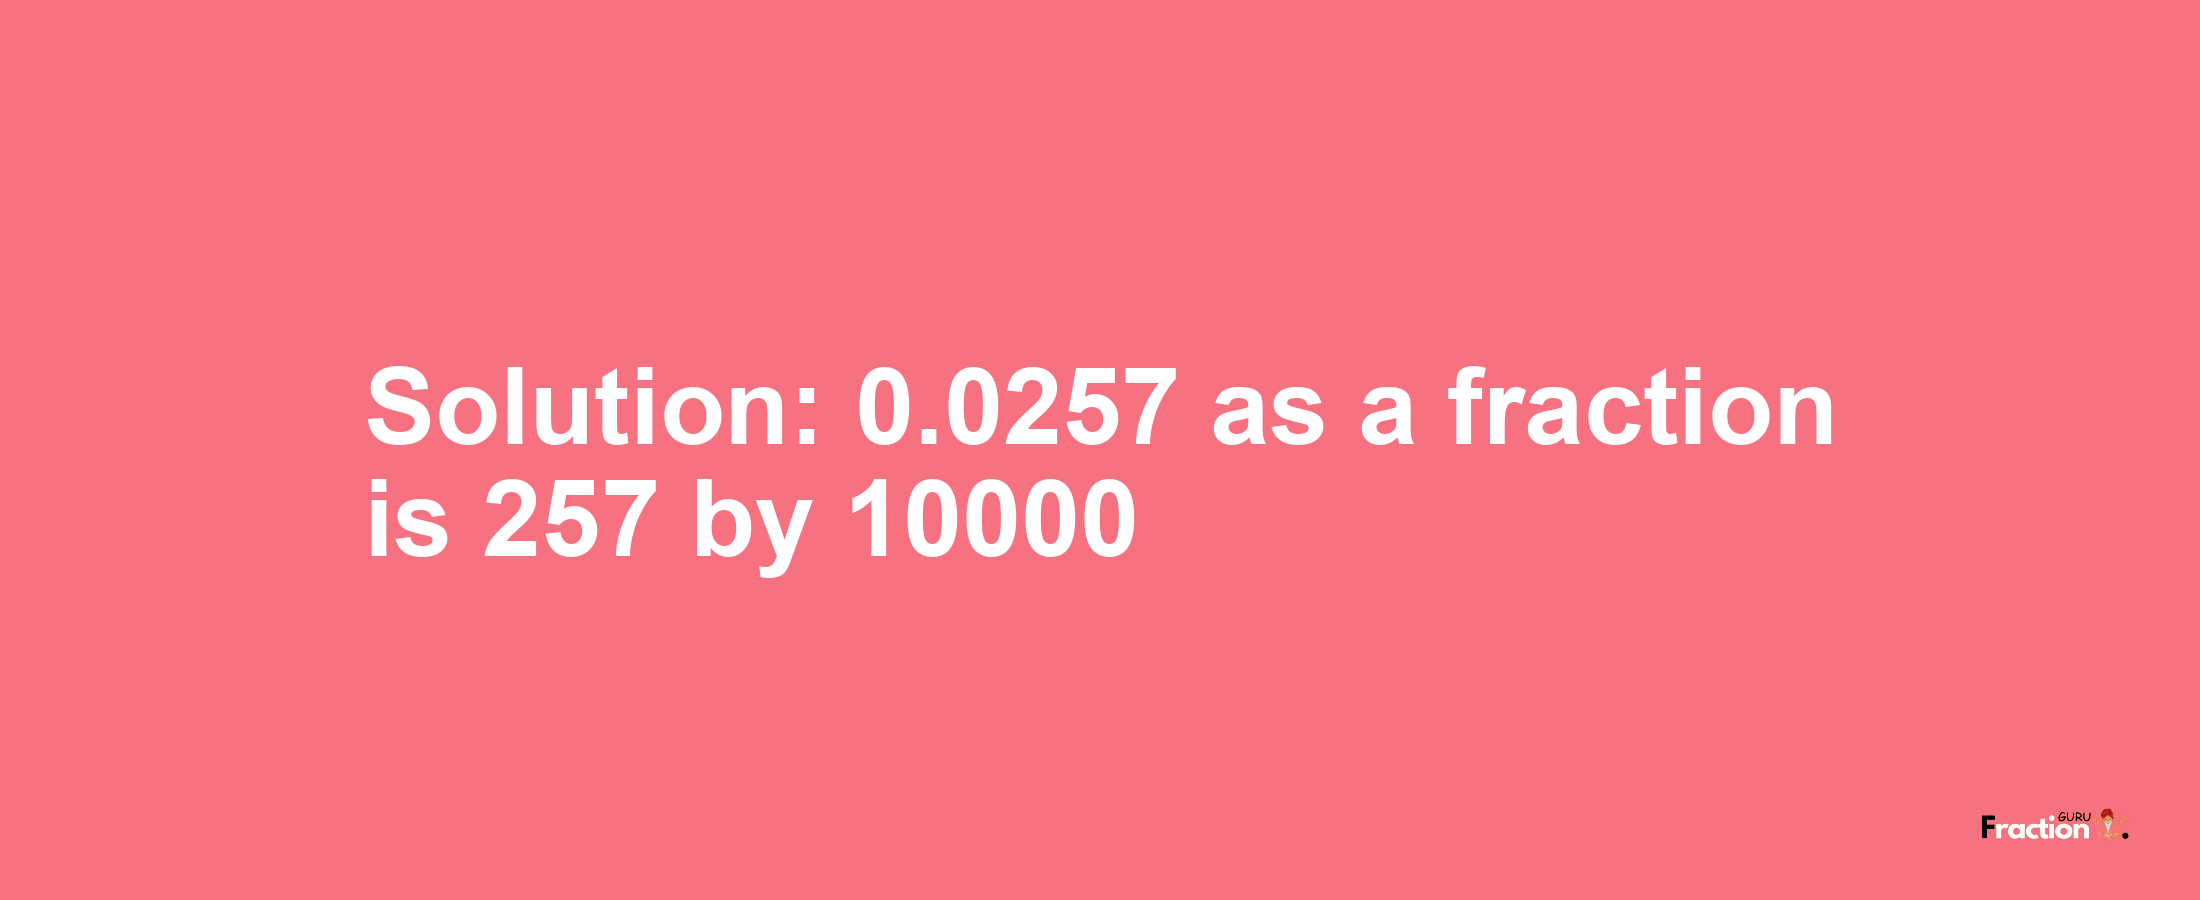 Solution:0.0257 as a fraction is 257/10000